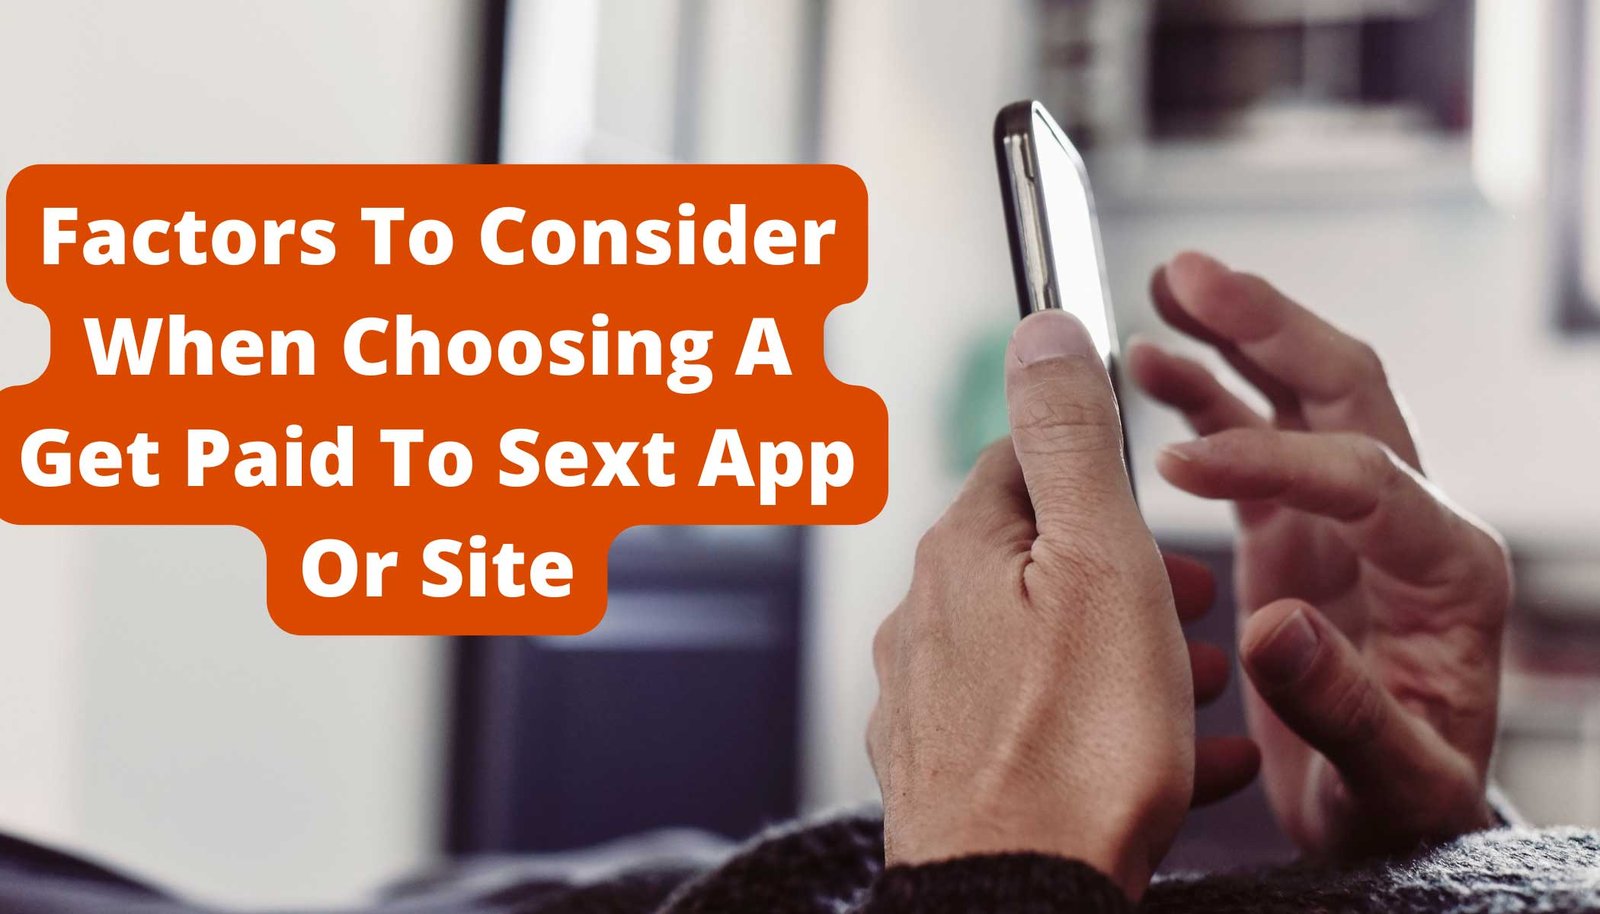 Factors-To-Consider-When-Choosing-A-Get-Paid-To-Sext-App-Or-Site-Sproutmentor